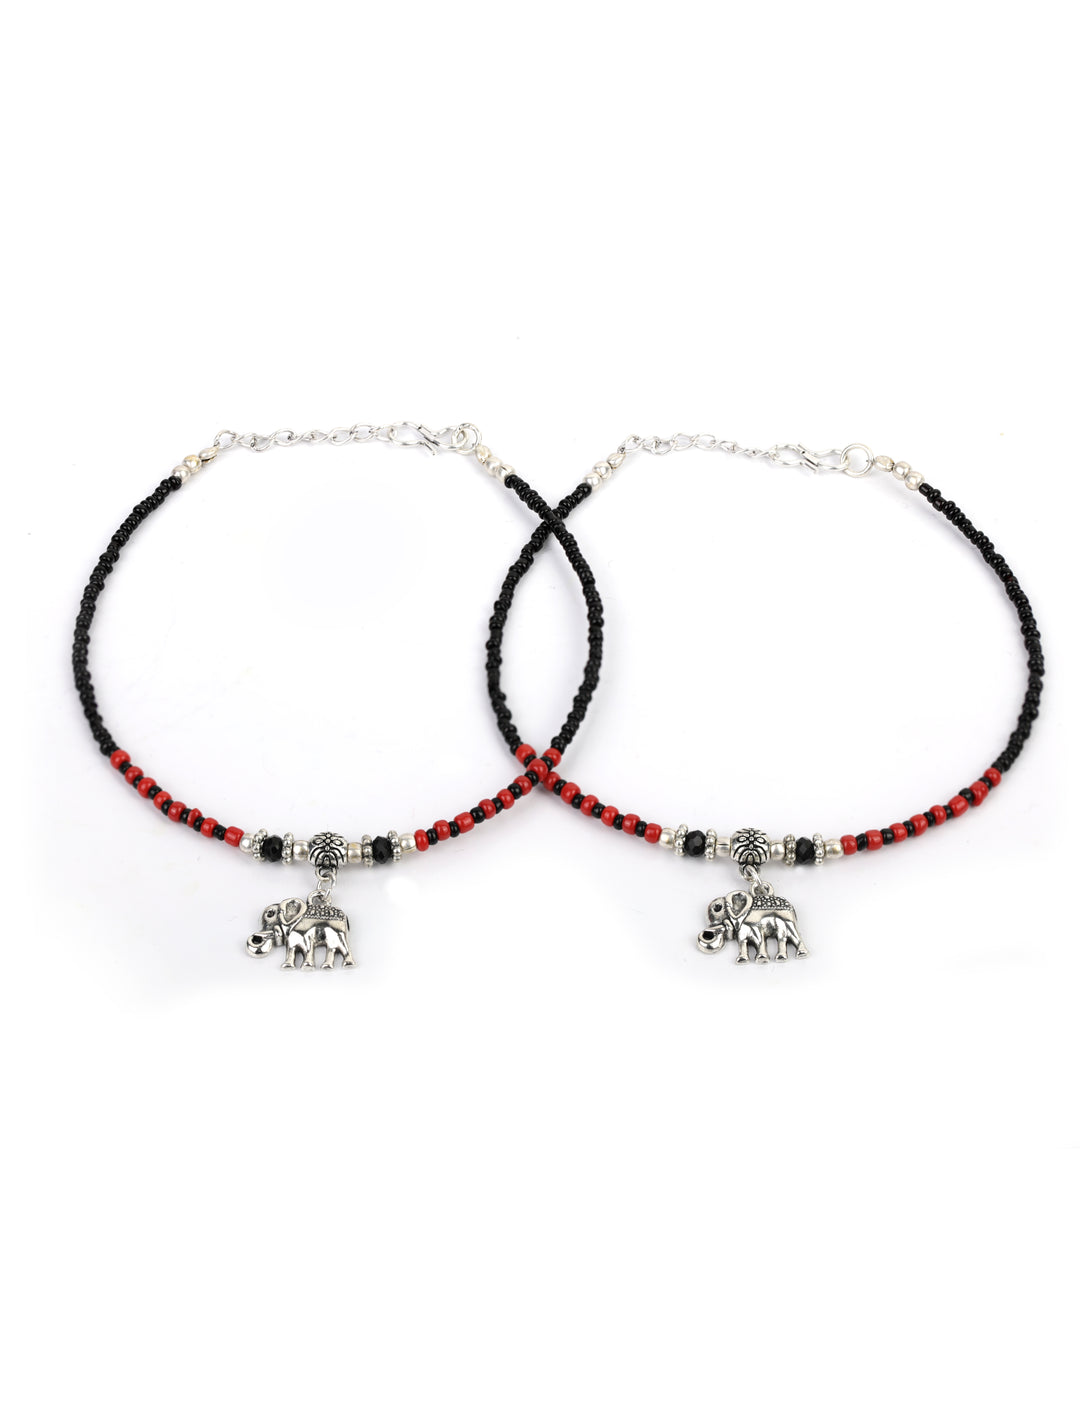 Black Red Beads Silver Plated Elephant Traditional Anklets